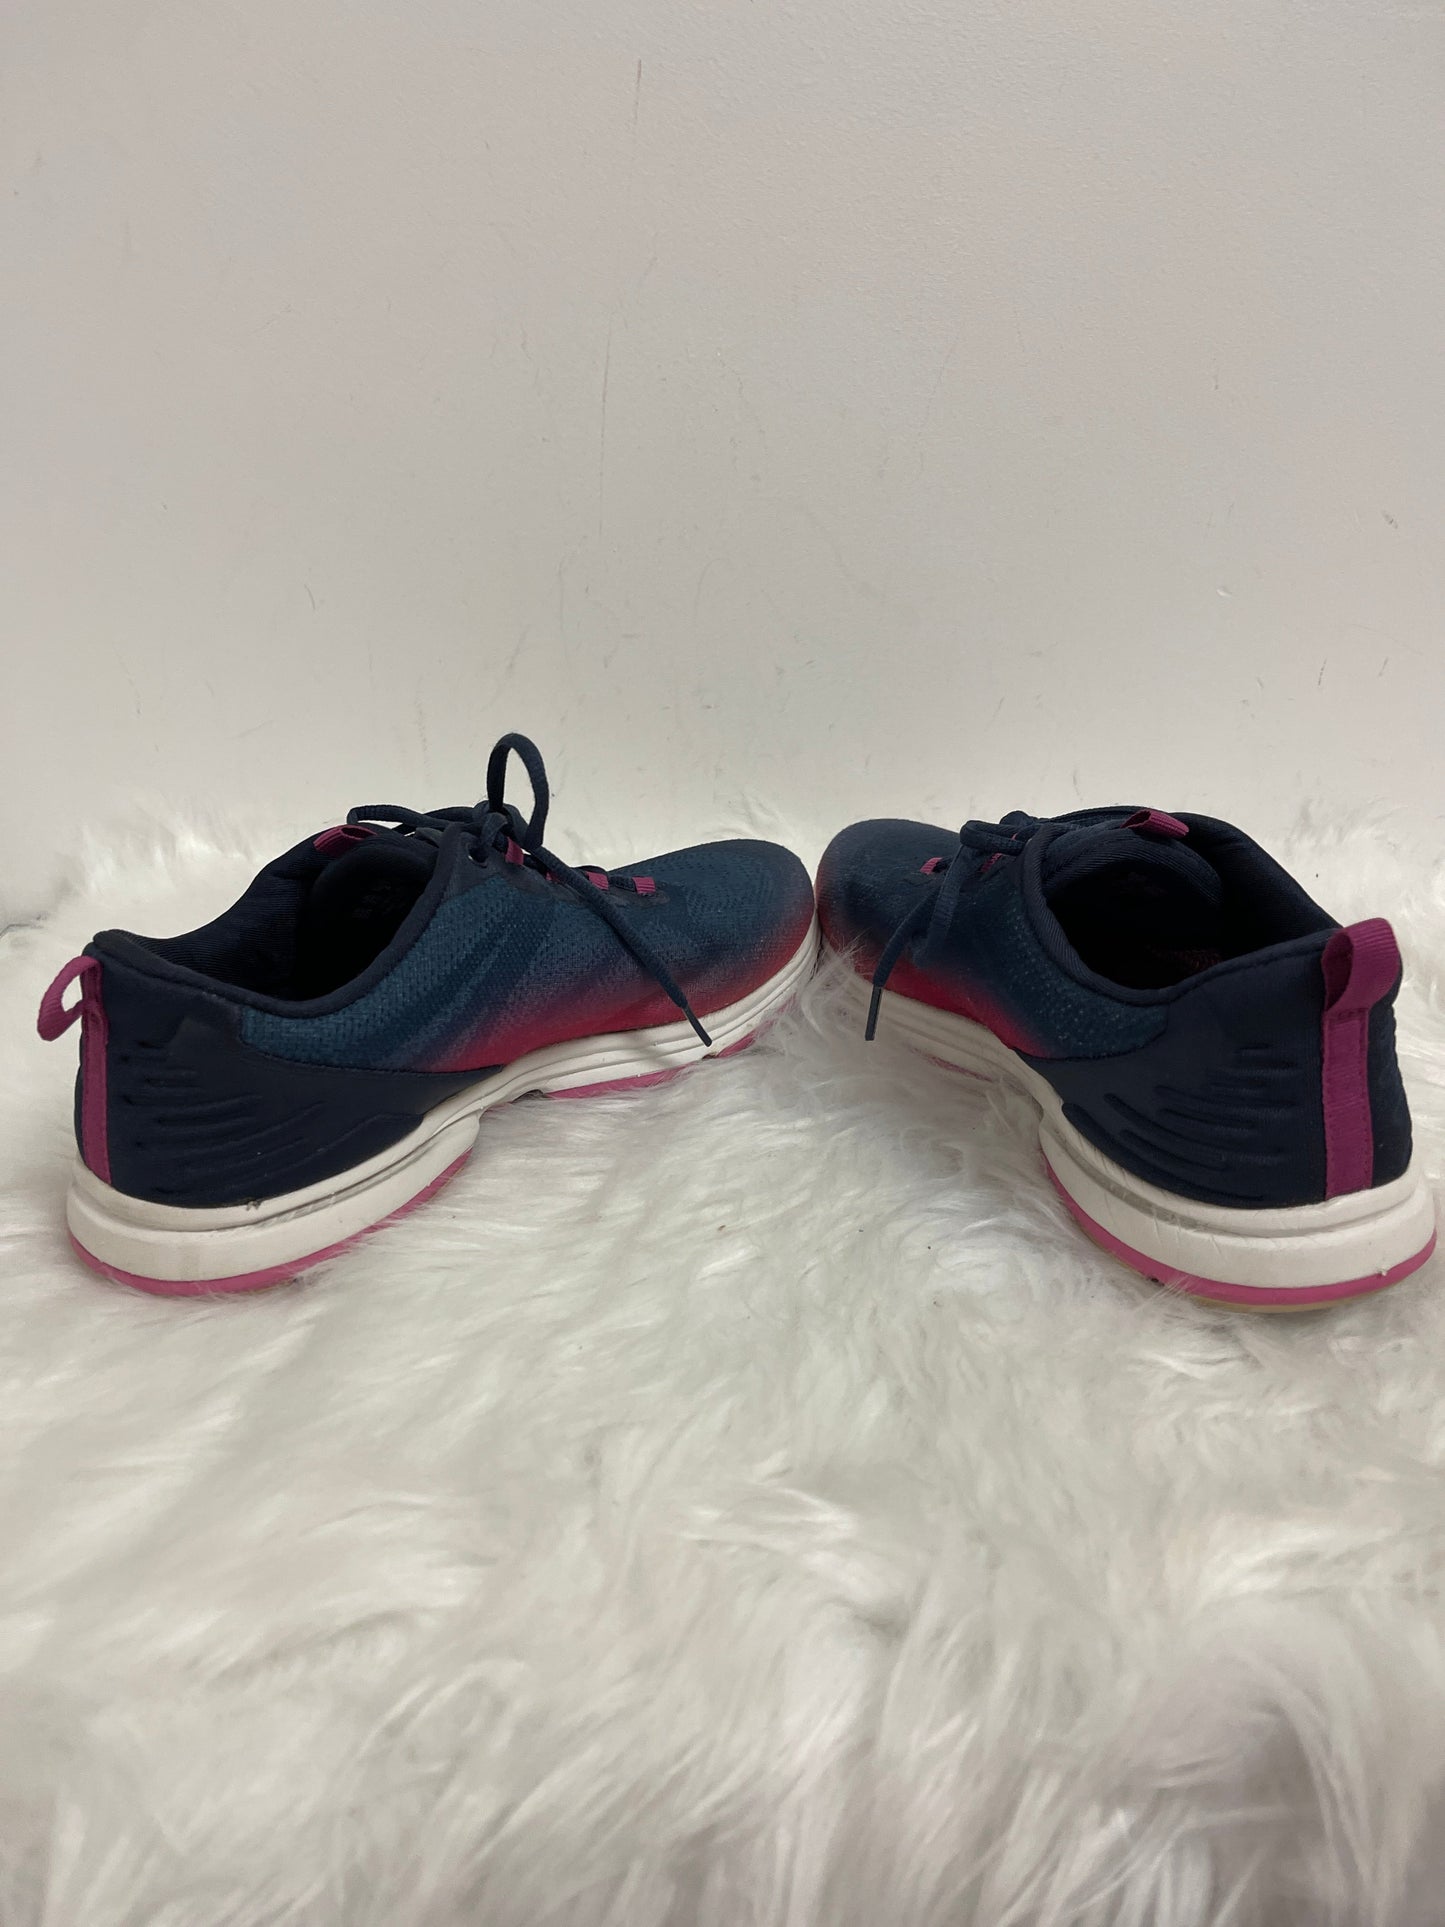 Blue & Pink Shoes Athletic Ryka, Size 9